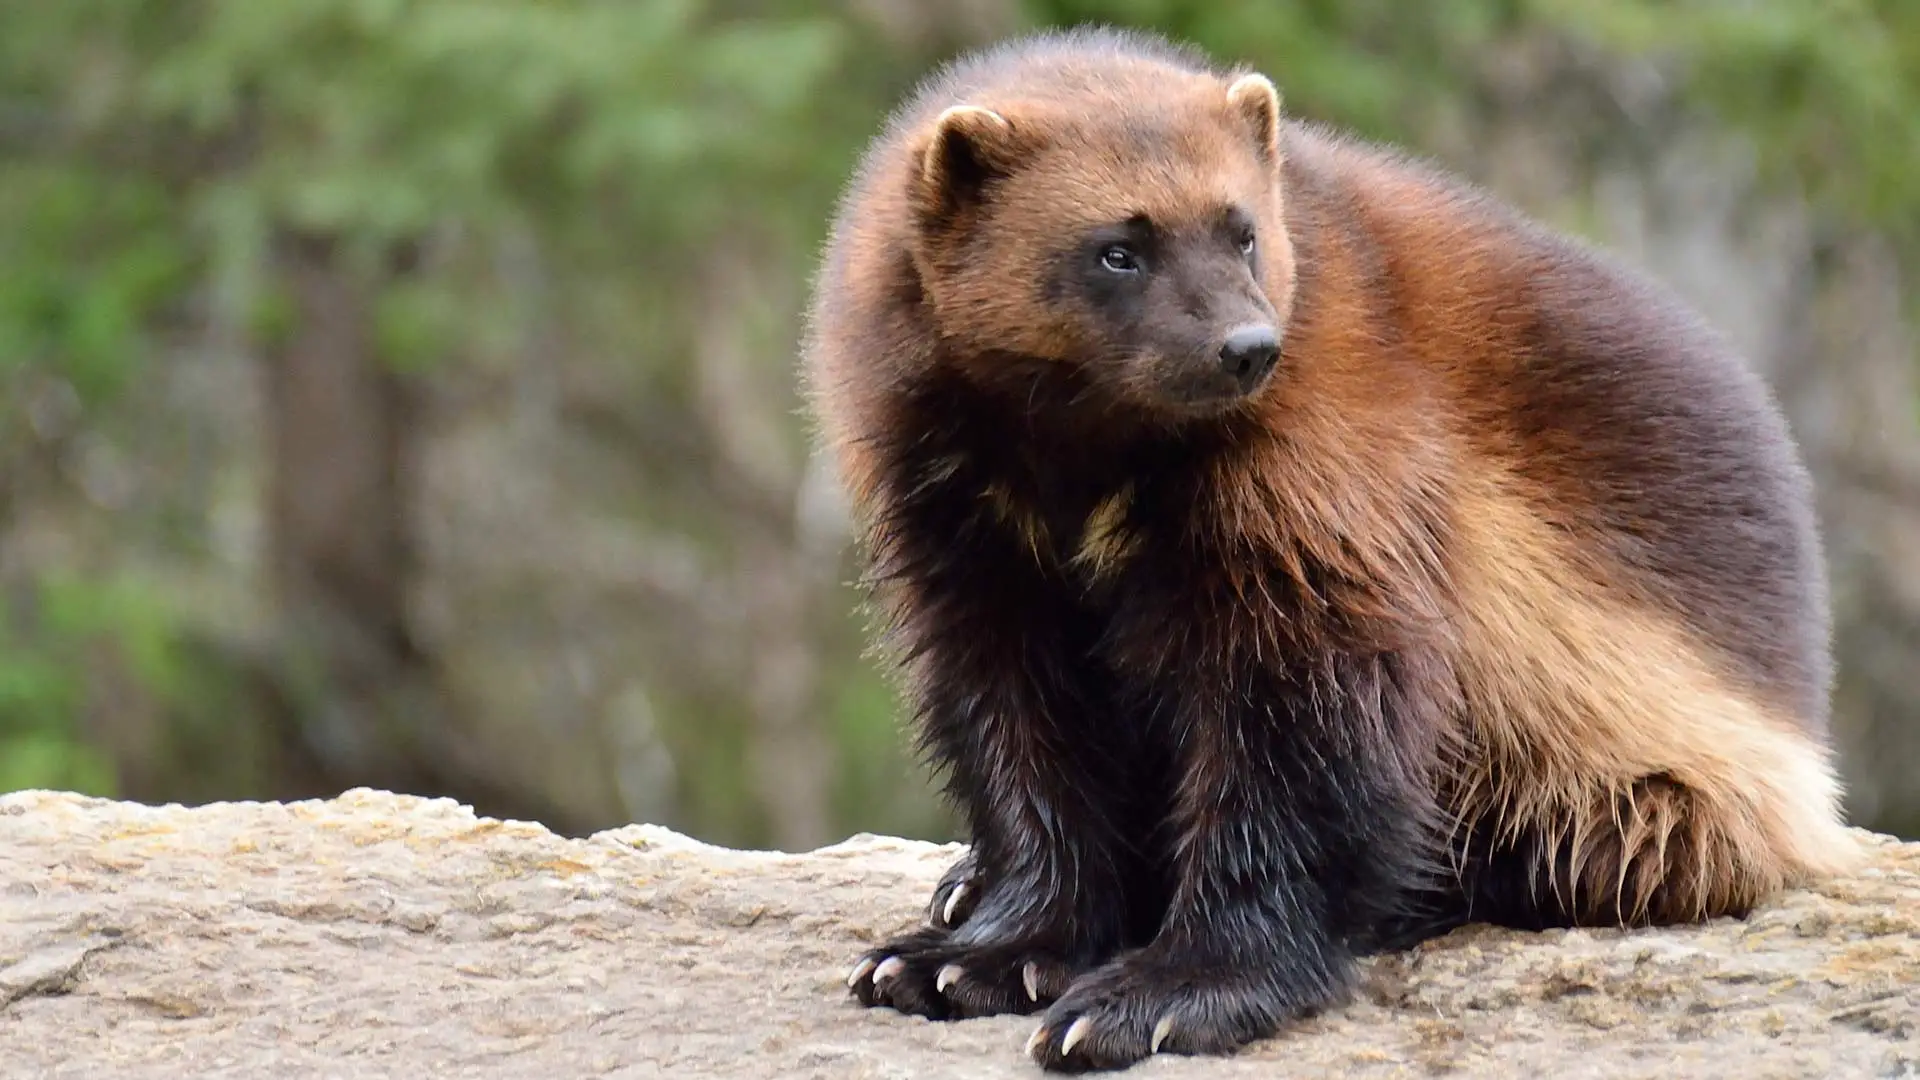 Petition to help protect Wolverines